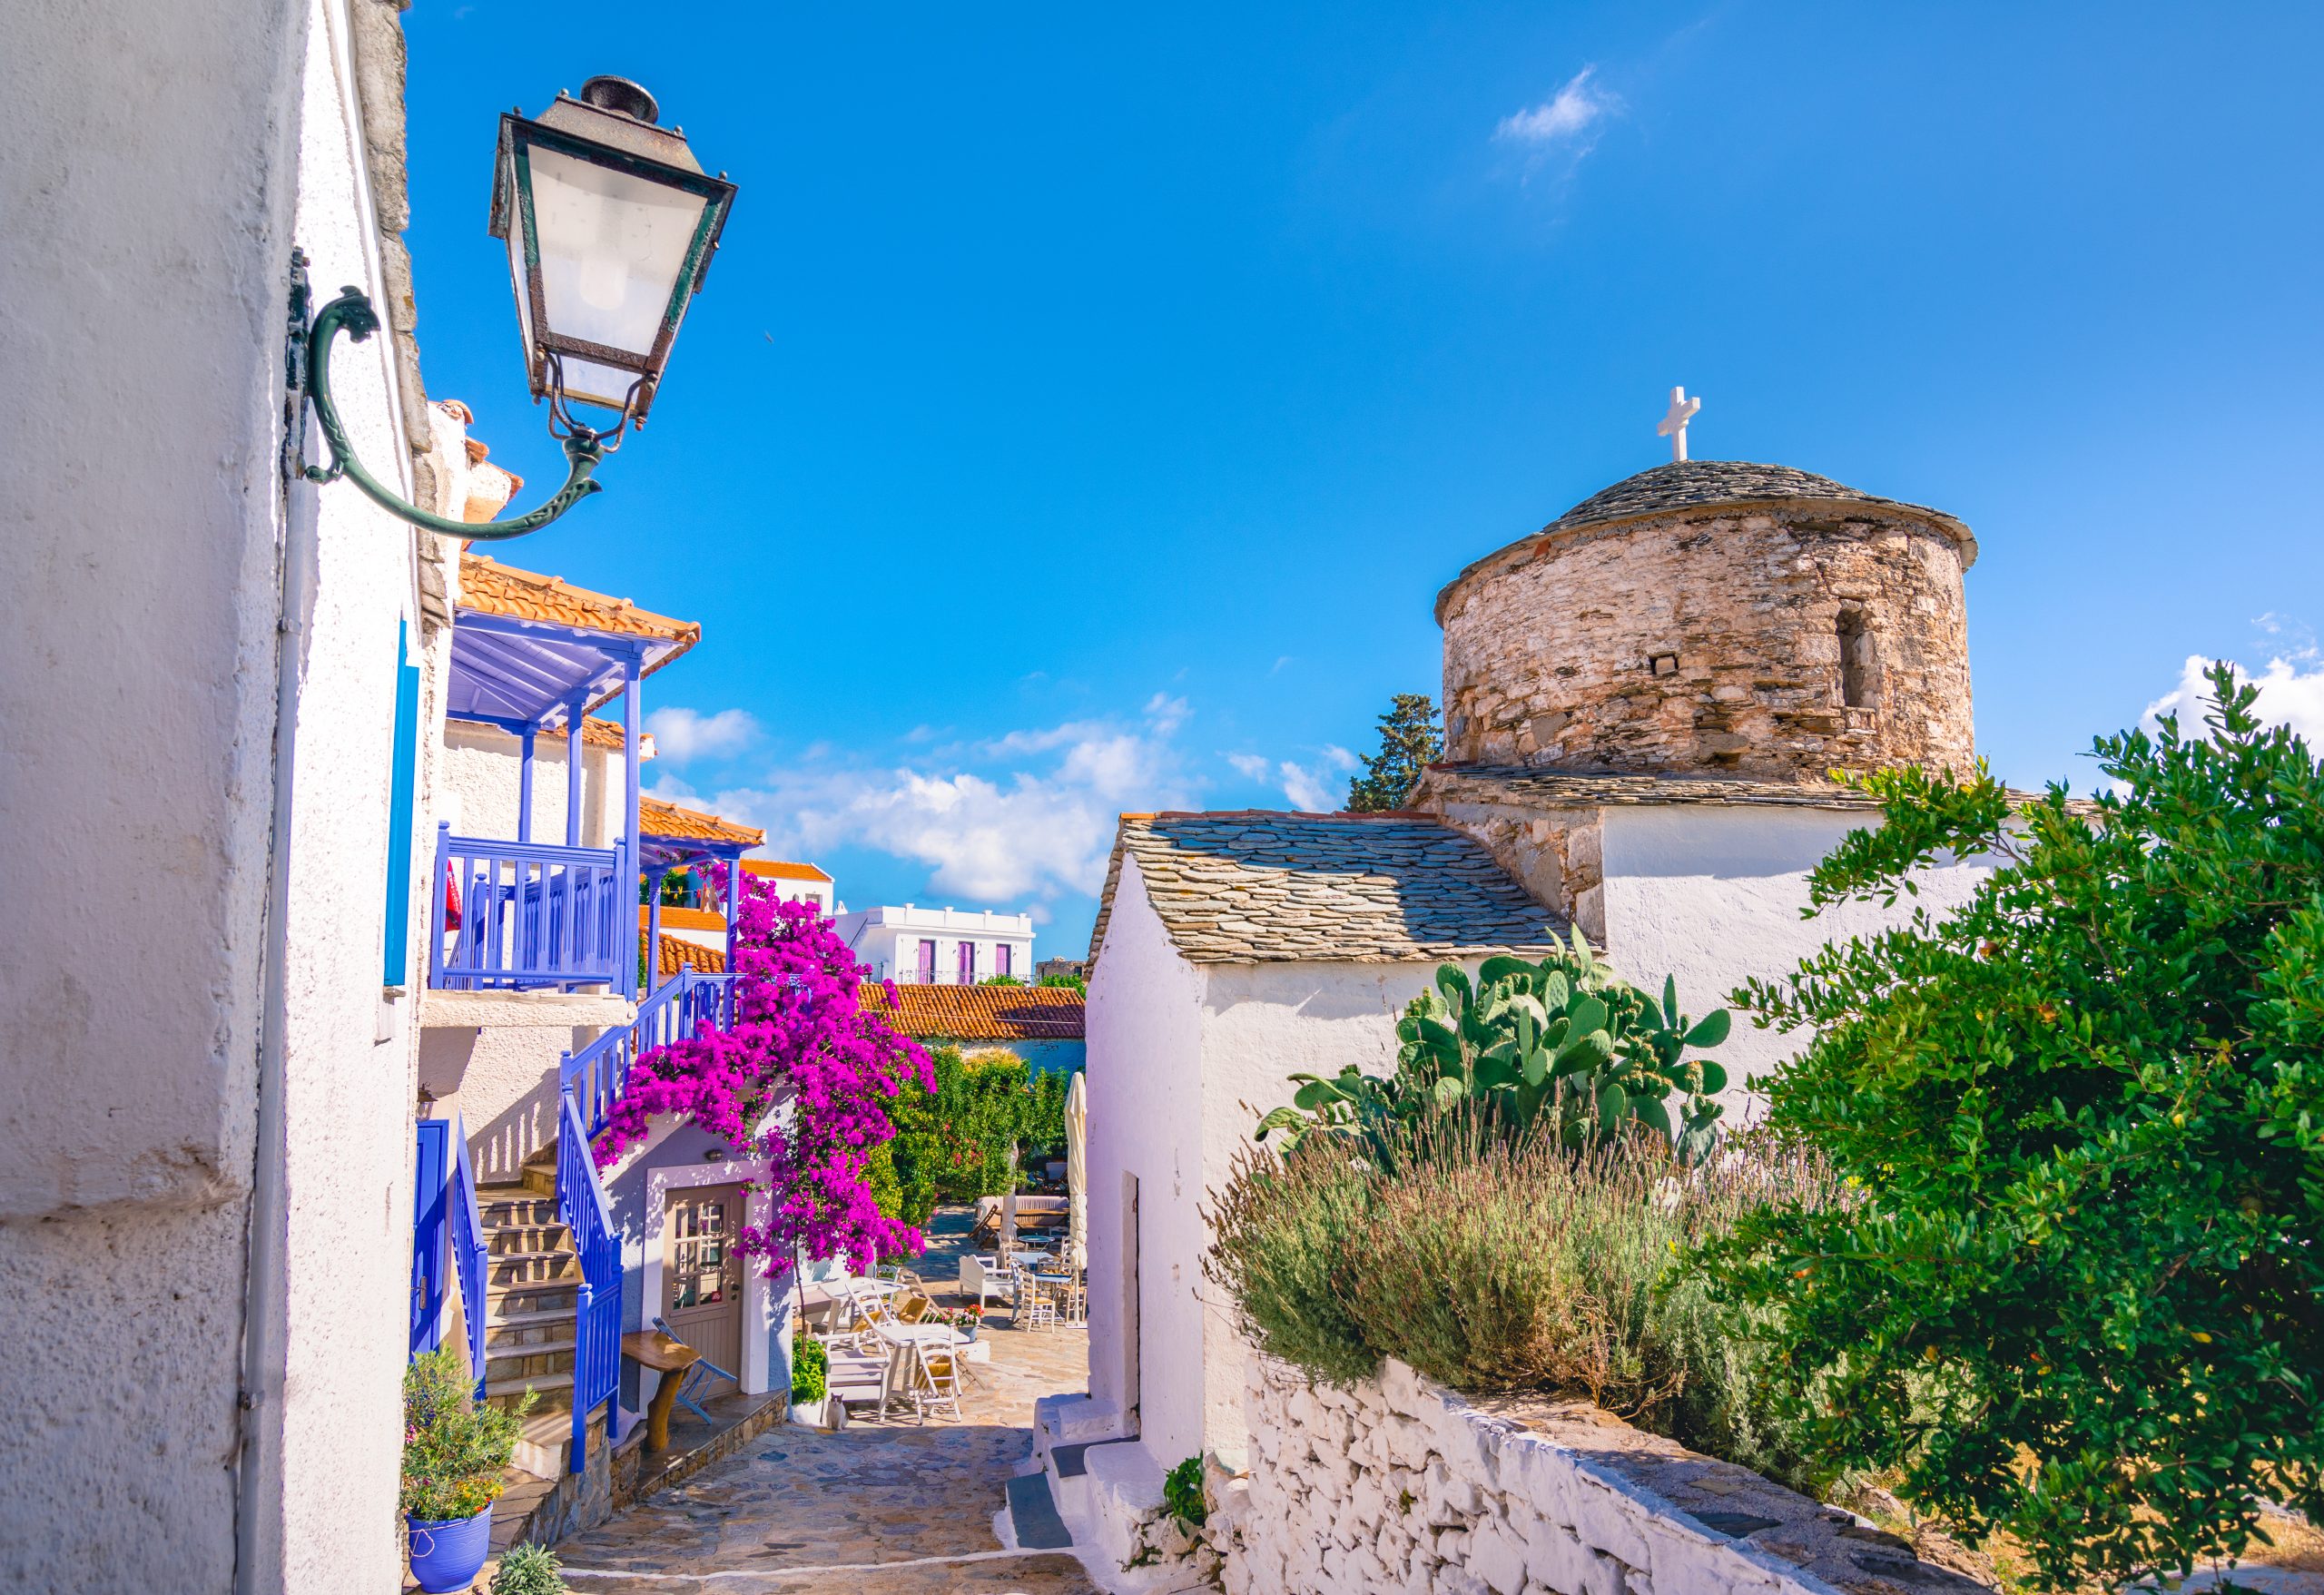 The,Old,Village,Of,Chora,In,Alonnisos,Island,,Greece.